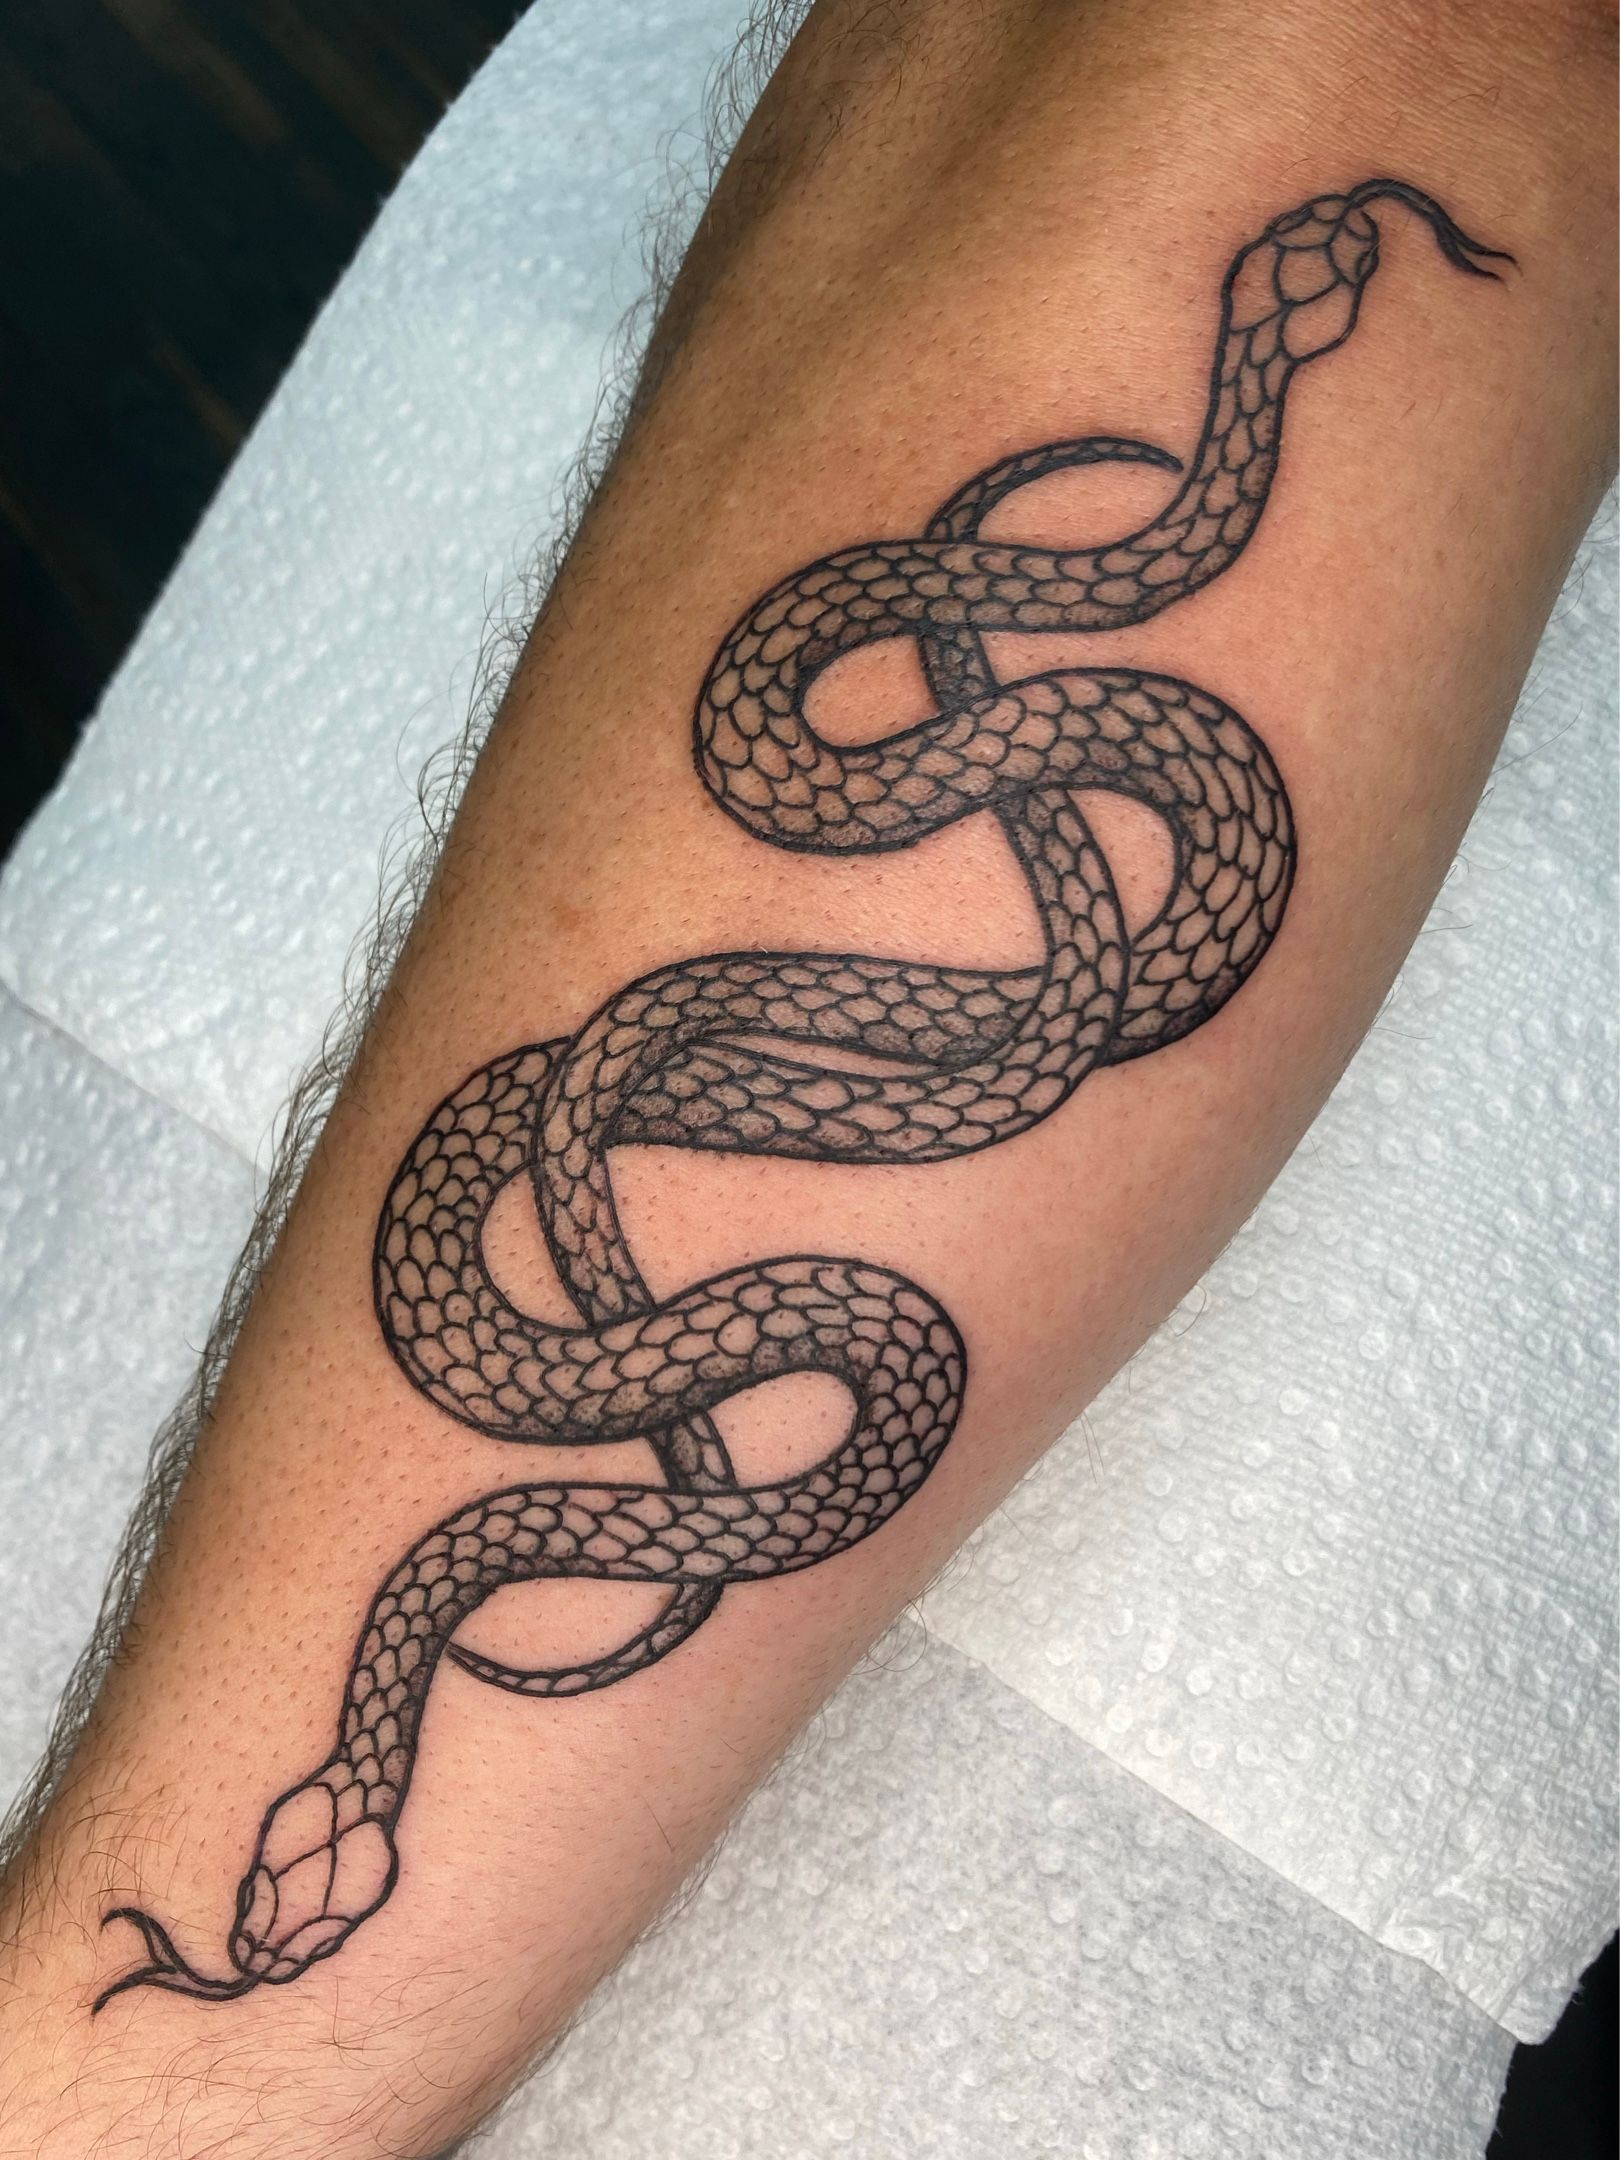 Intertwined Snakes  Tattoos for guys Sleeve tattoos Trendy tattoos